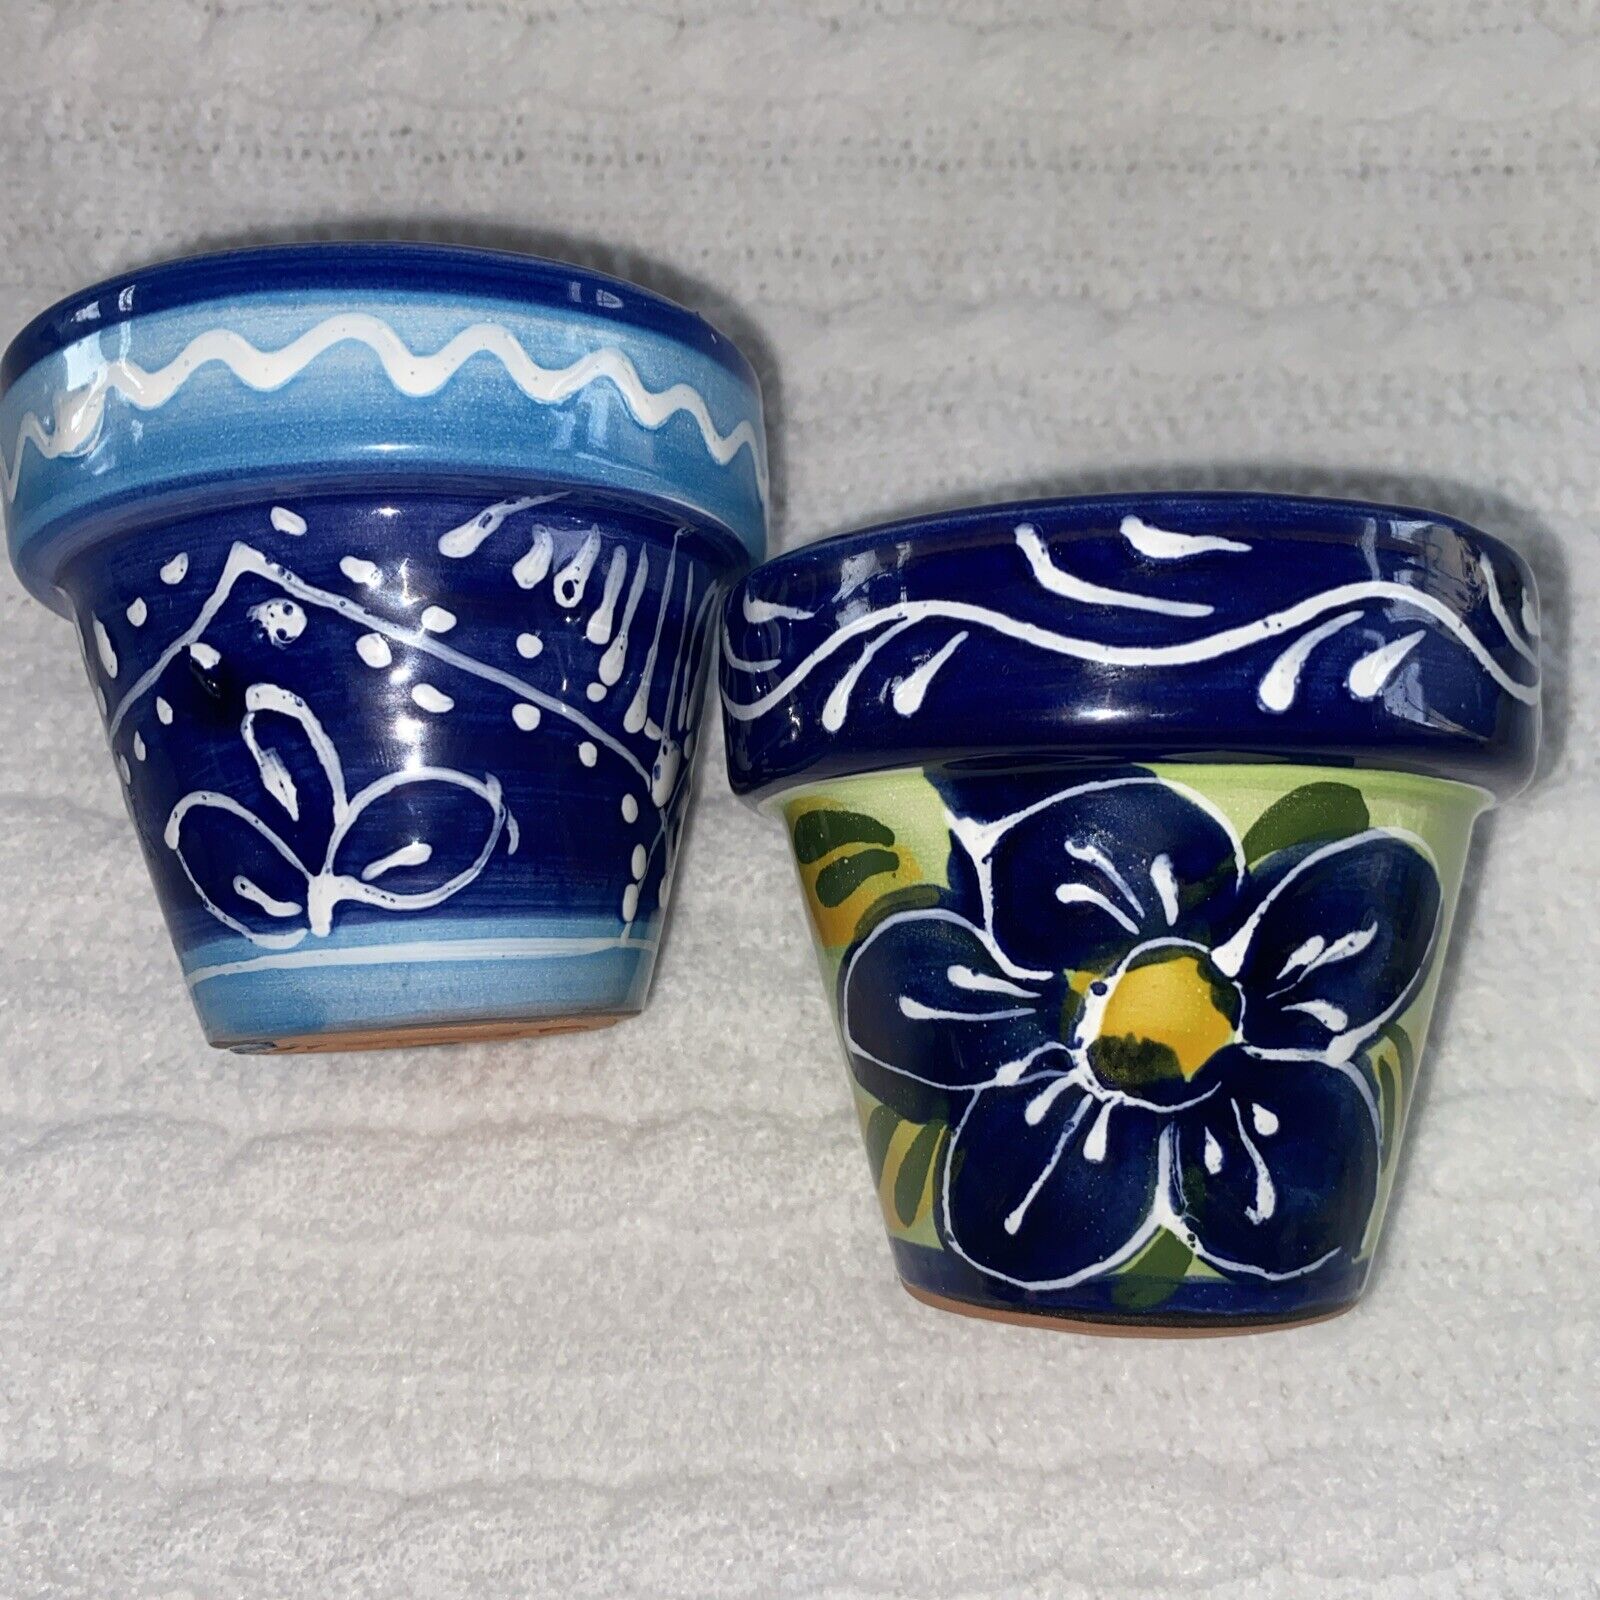 TWO Sunshine Ceramica Hand Painted 3.5” X 3.25” Planters / Pots  Made in Spain